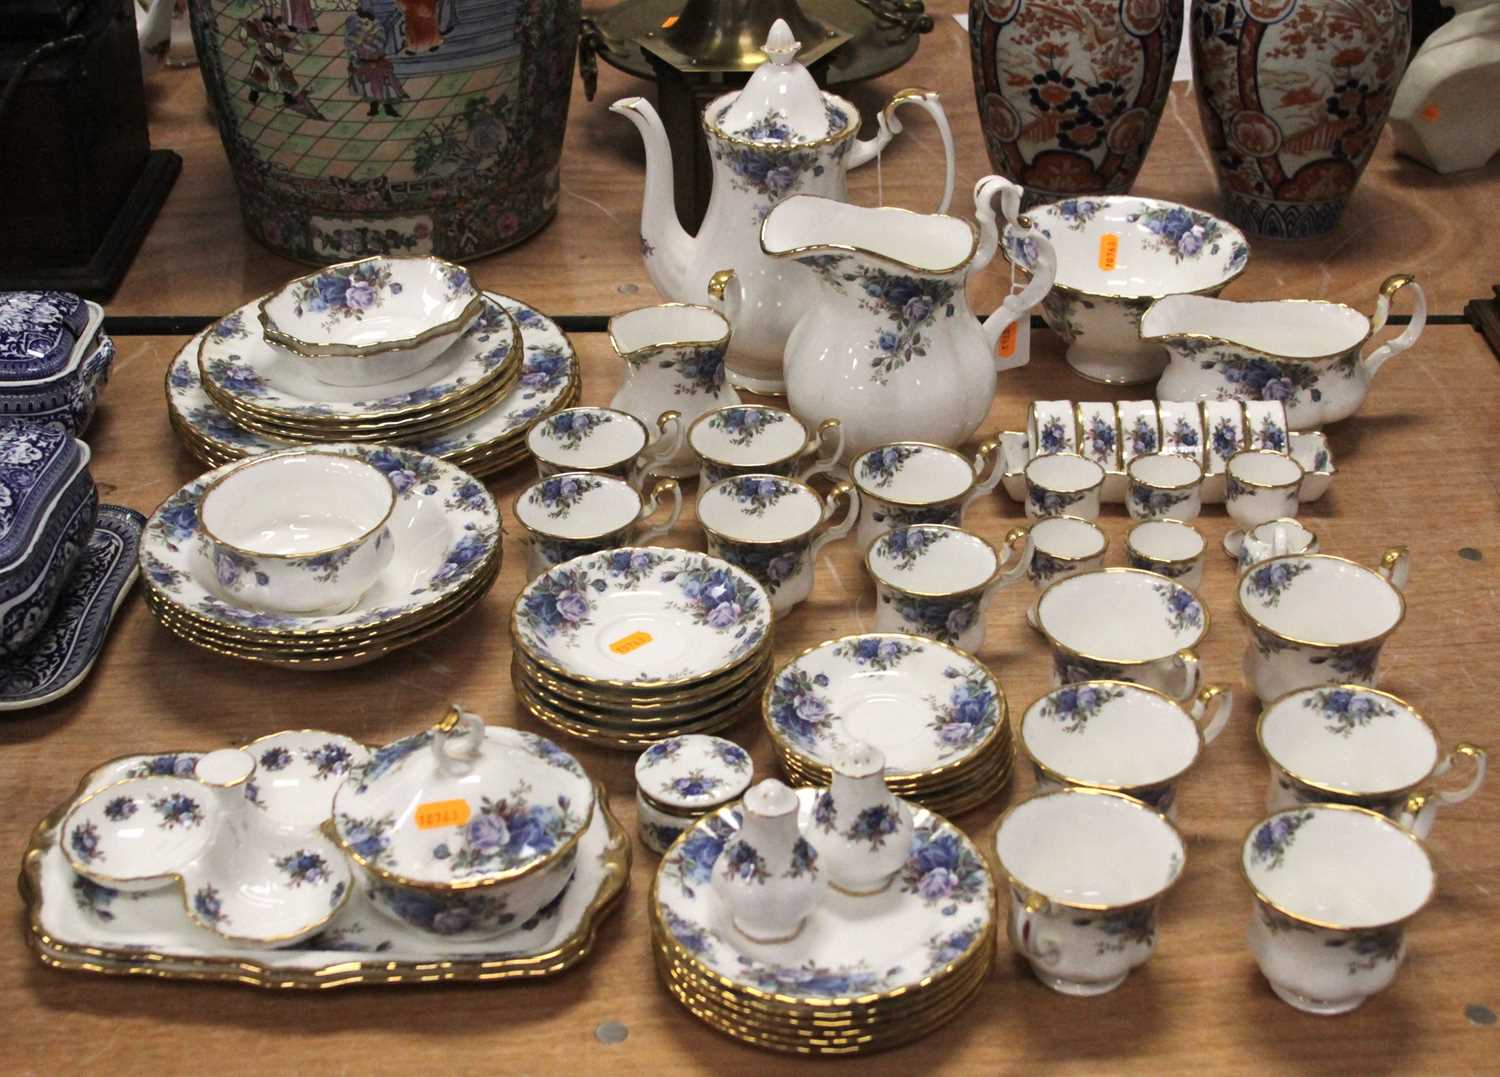 An extensive collection of Royal Albert table wares in the Moonlight Rose pattern, having printed